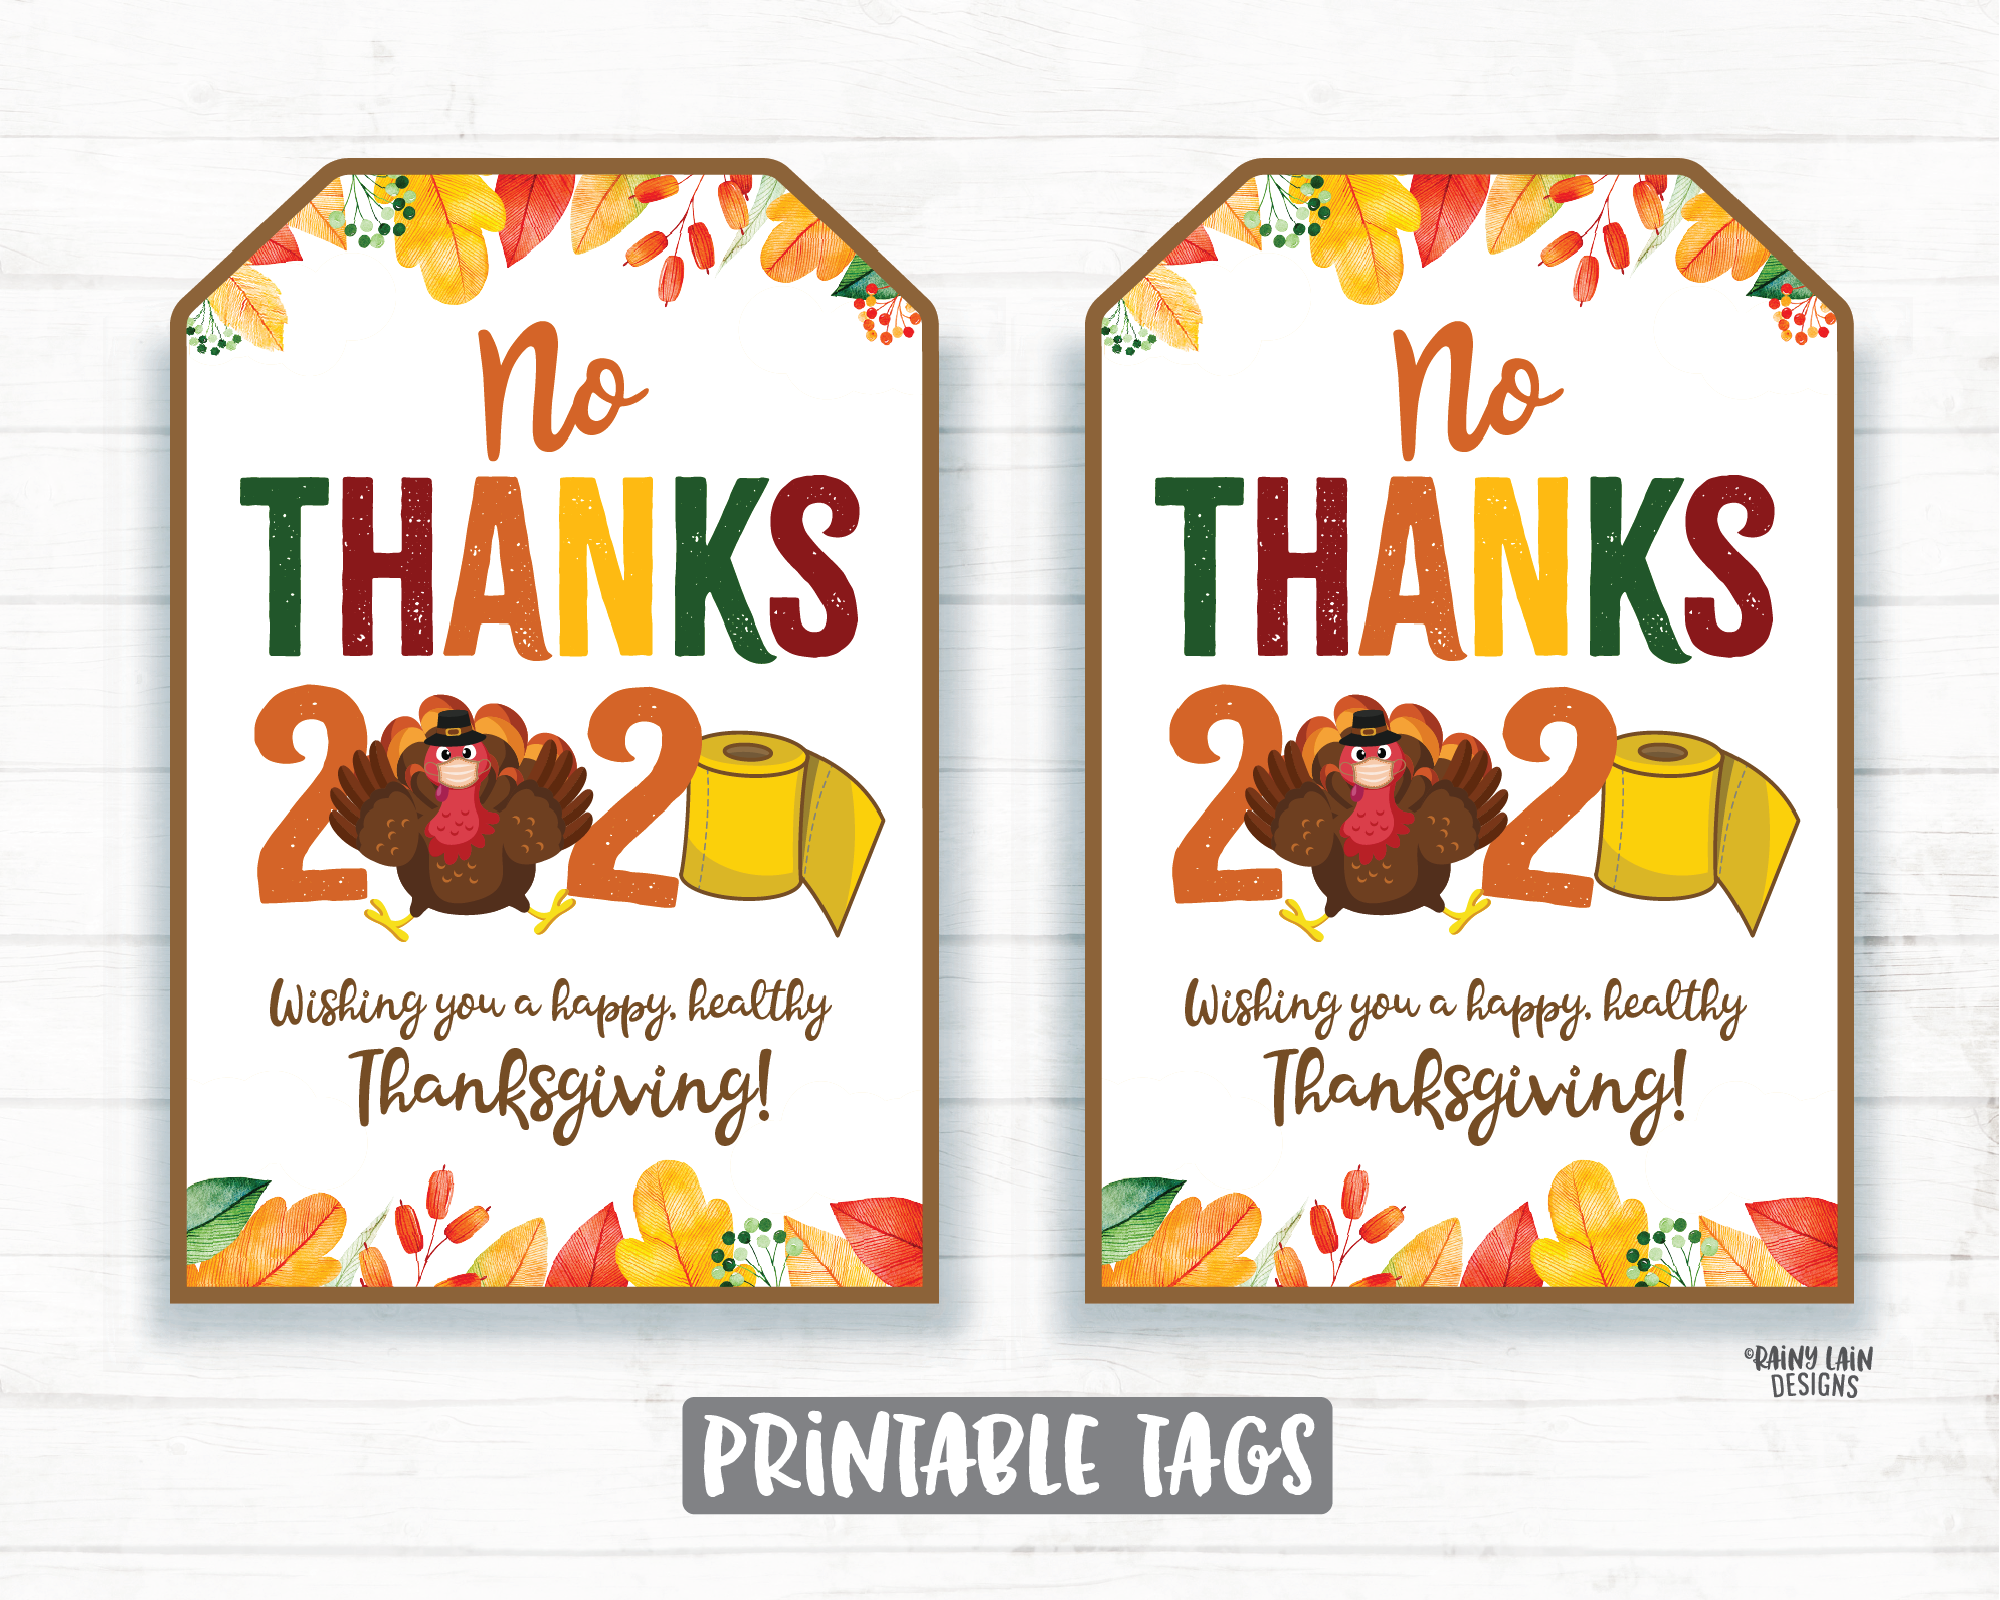 No Thanks 2020 Tags Happy Thanksgiving 2020 Tag Quarantine Social Distancing 2020 Thanksgiving Favor Tag Cookie Tags Teacher Staff Co-worker